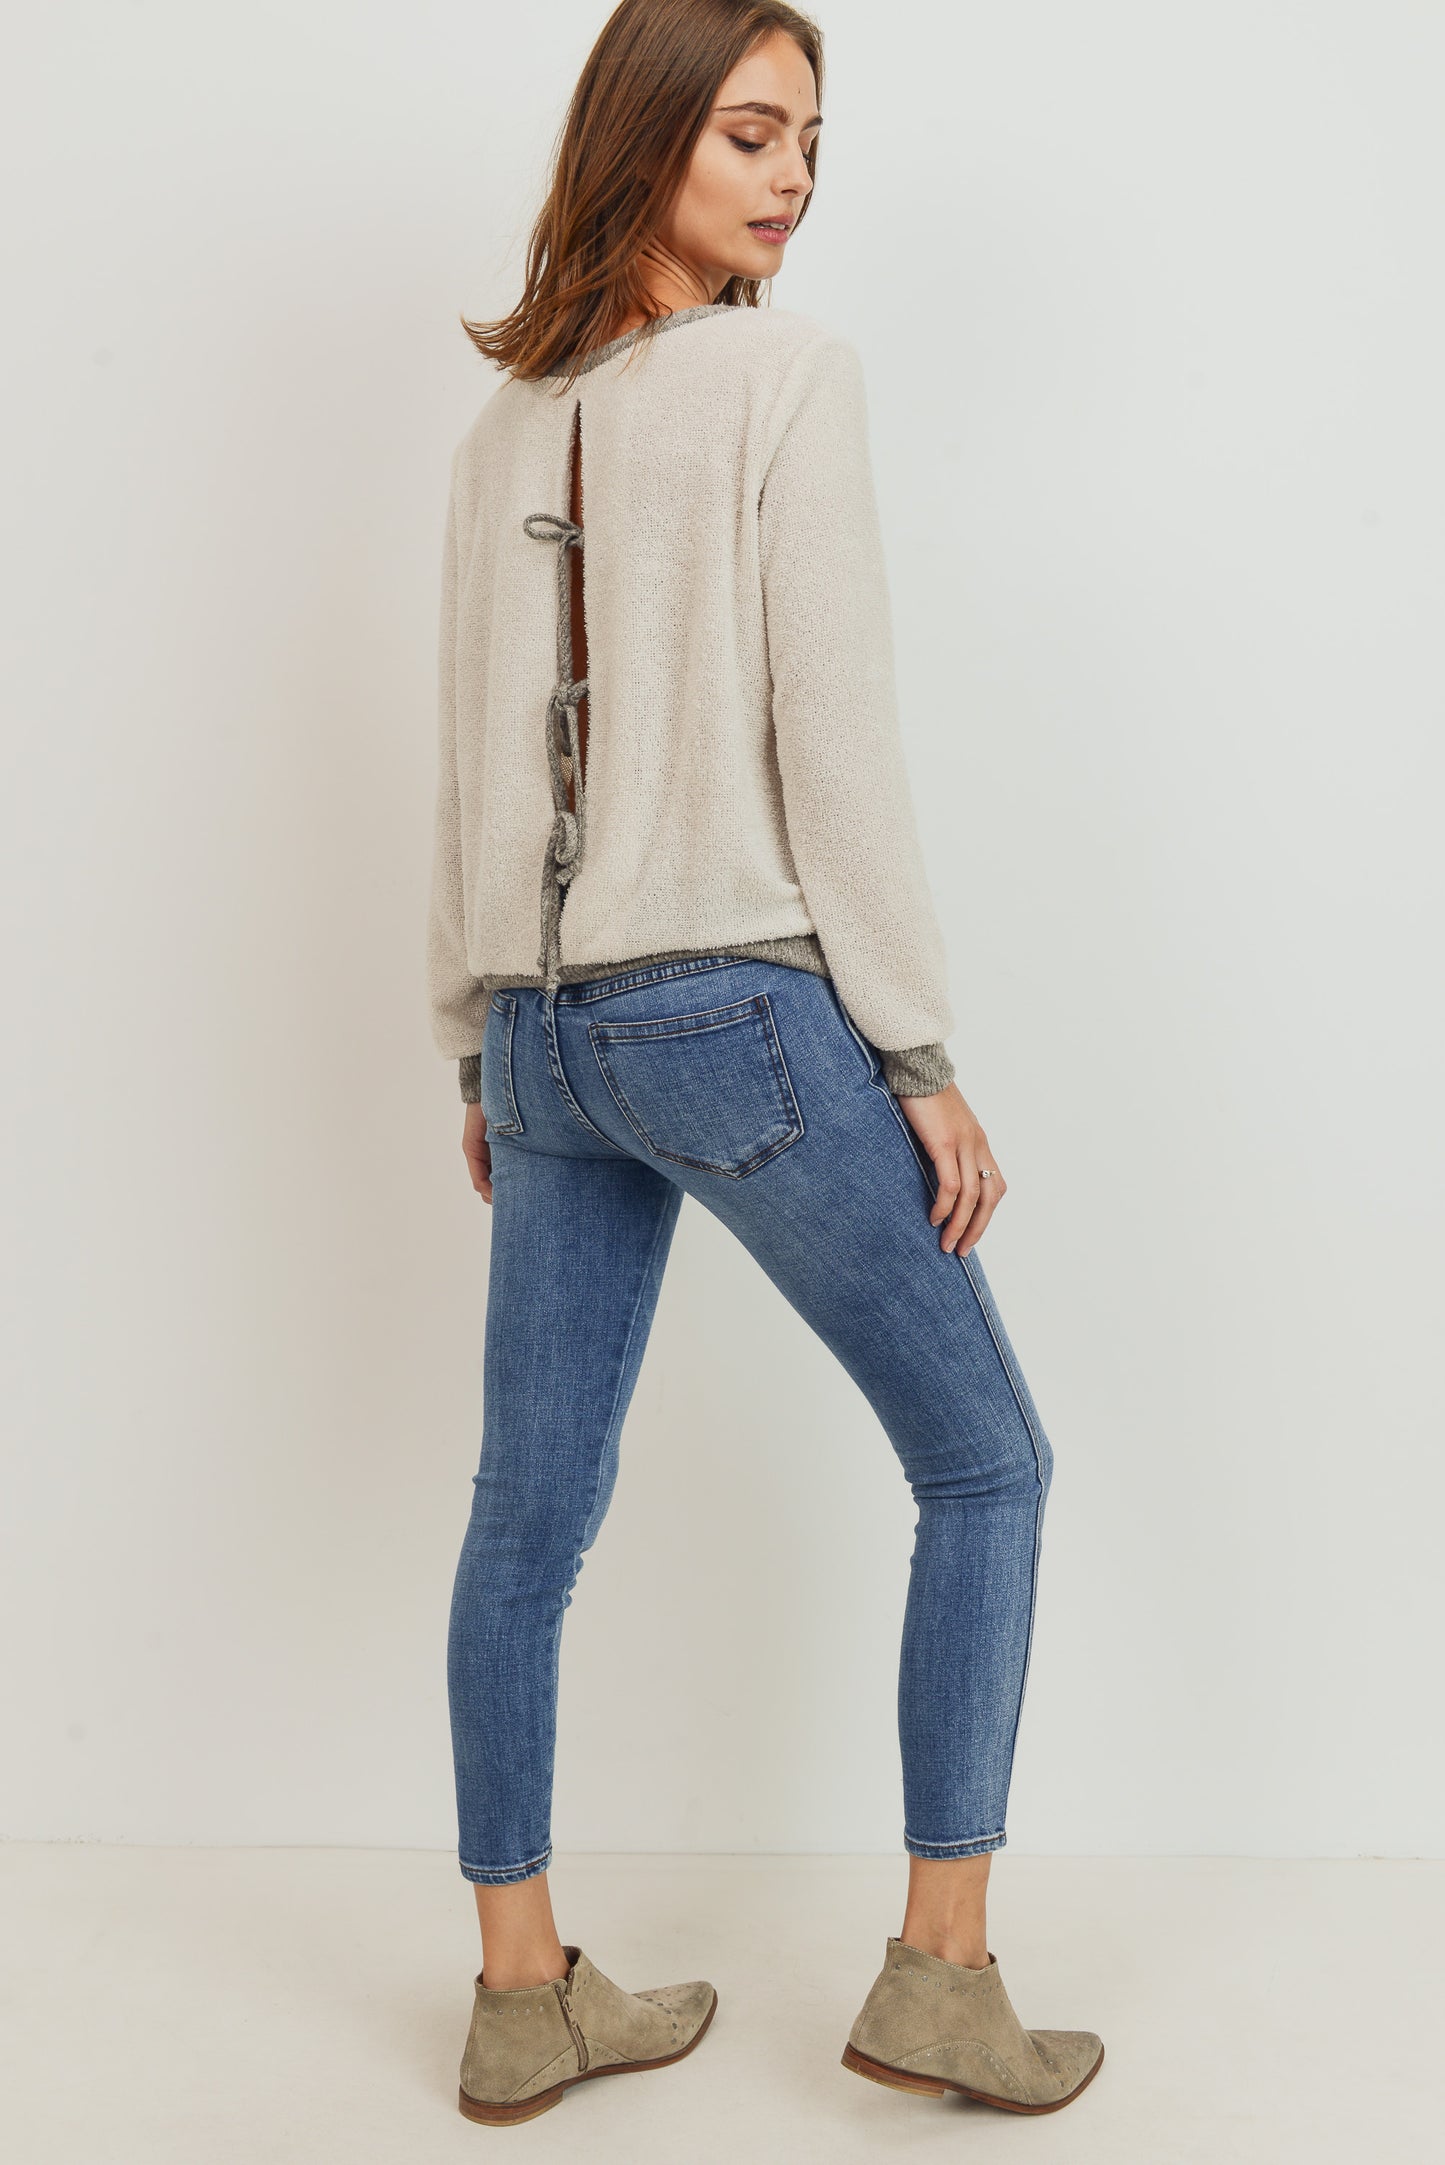 Textured Knit Long Sleeve Top With Opened Back !